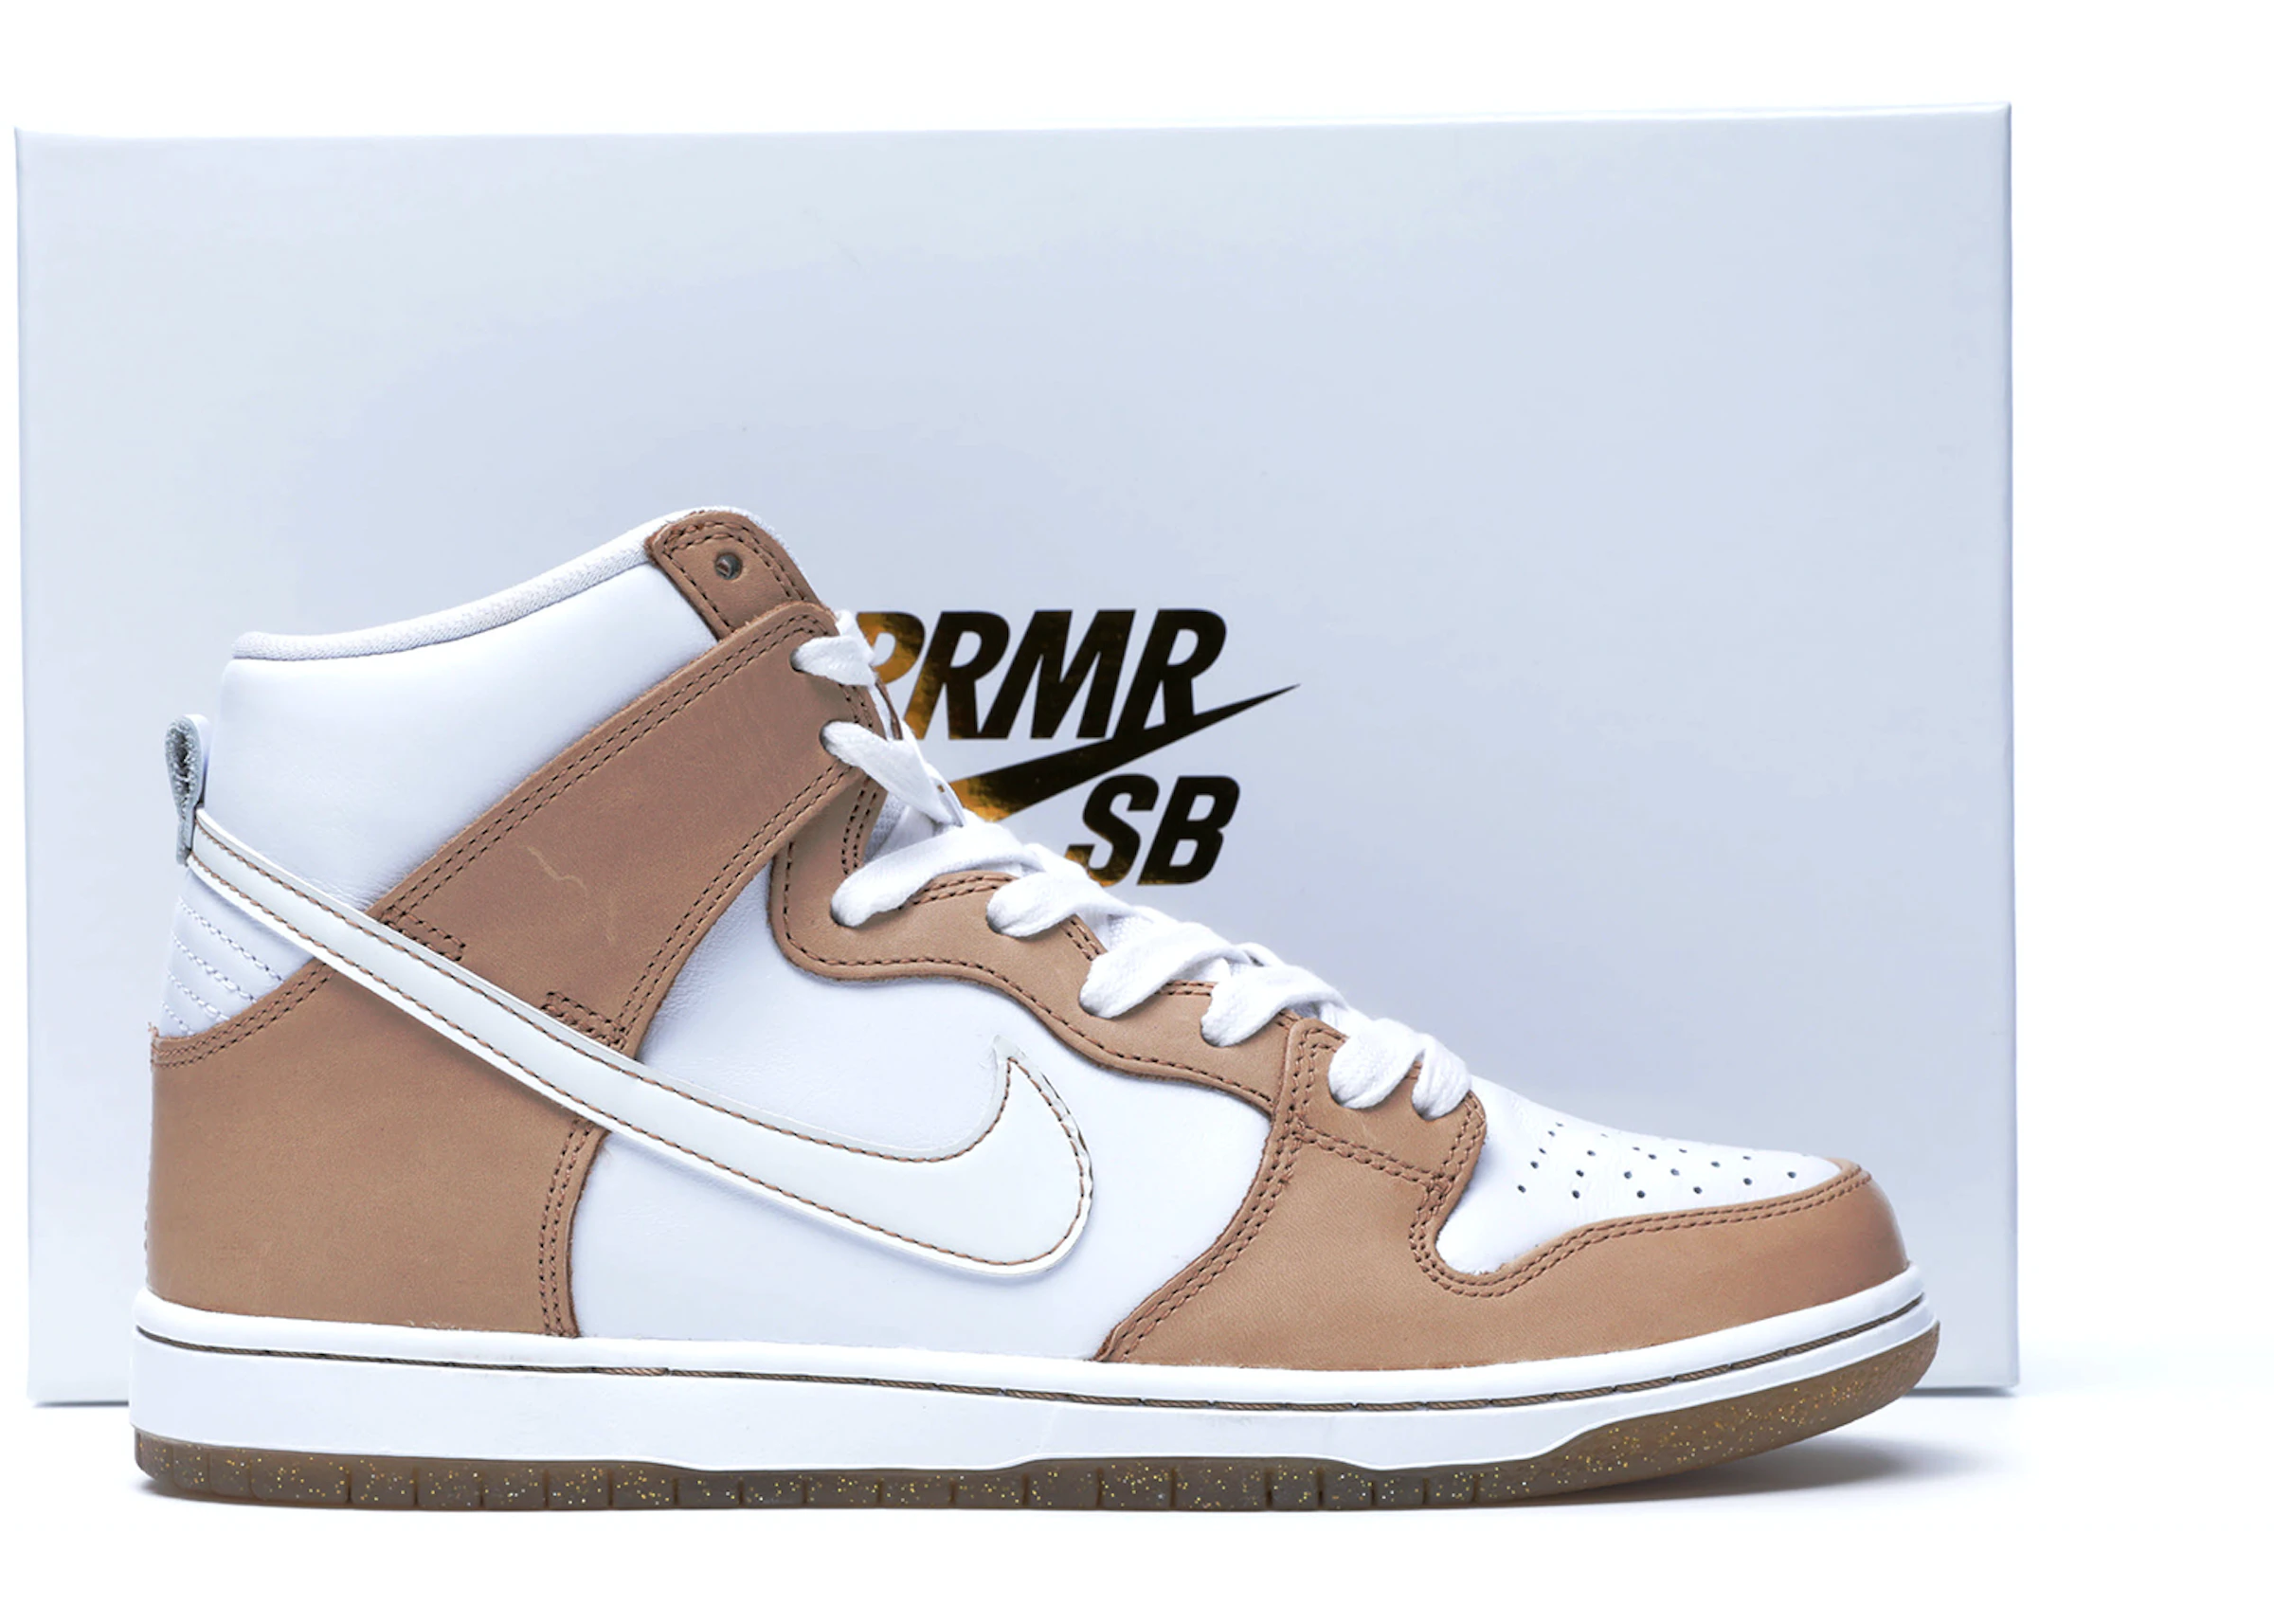 Nike SB Dunk High Premier Win Some Lose Some (Special Box with Accessories) Alternate Swoosh) - AH0471-217 - ES